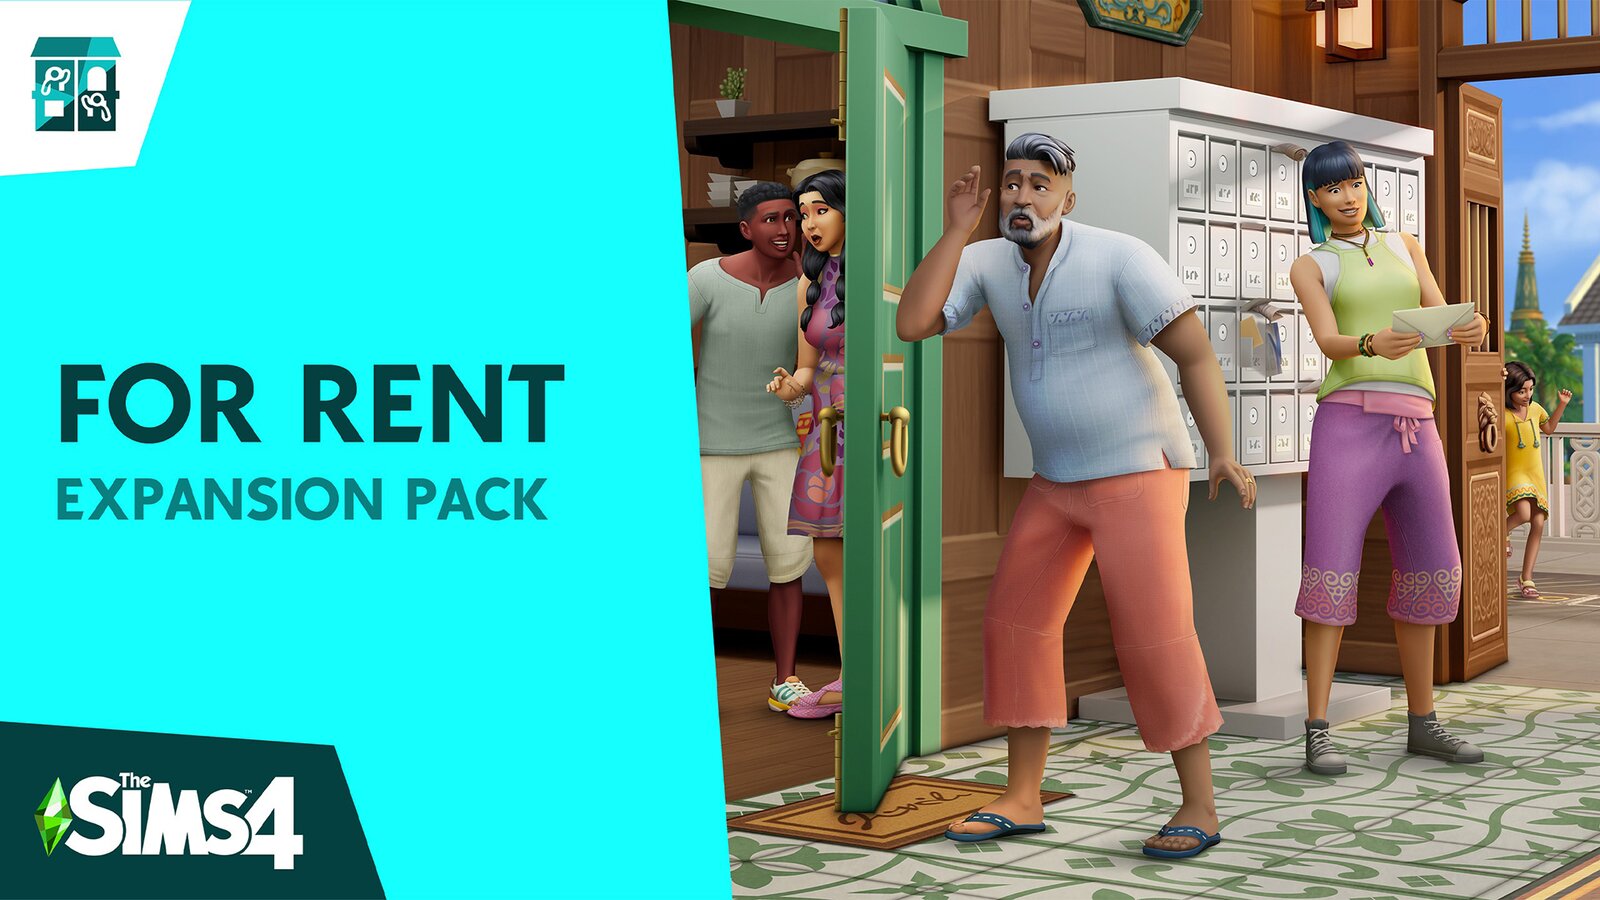 The Sims 4 - For Rent